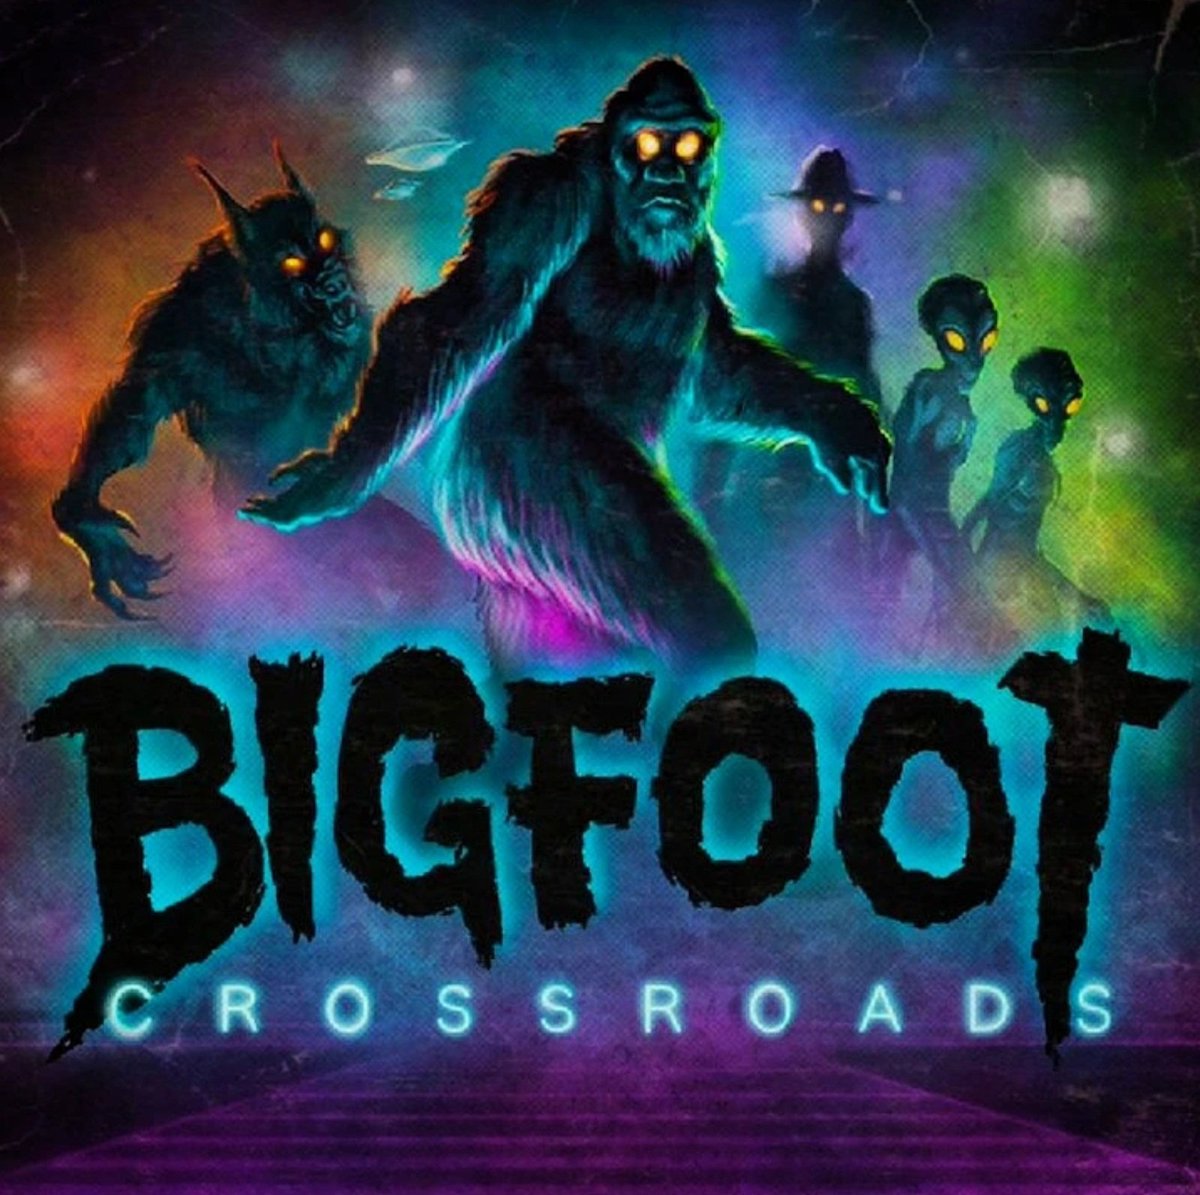 Sasquatch Sunday • Bigfoot Crossroads is definitely one of the best cryptid themed podcasts out there! Matt Knapp does an outstanding job and artist Jonathan Dodd outdid himself with the BC logo! Check it out! #bigfoot #sasquatch #cryptid #cryptozoology #sasquatchsunday #dogman